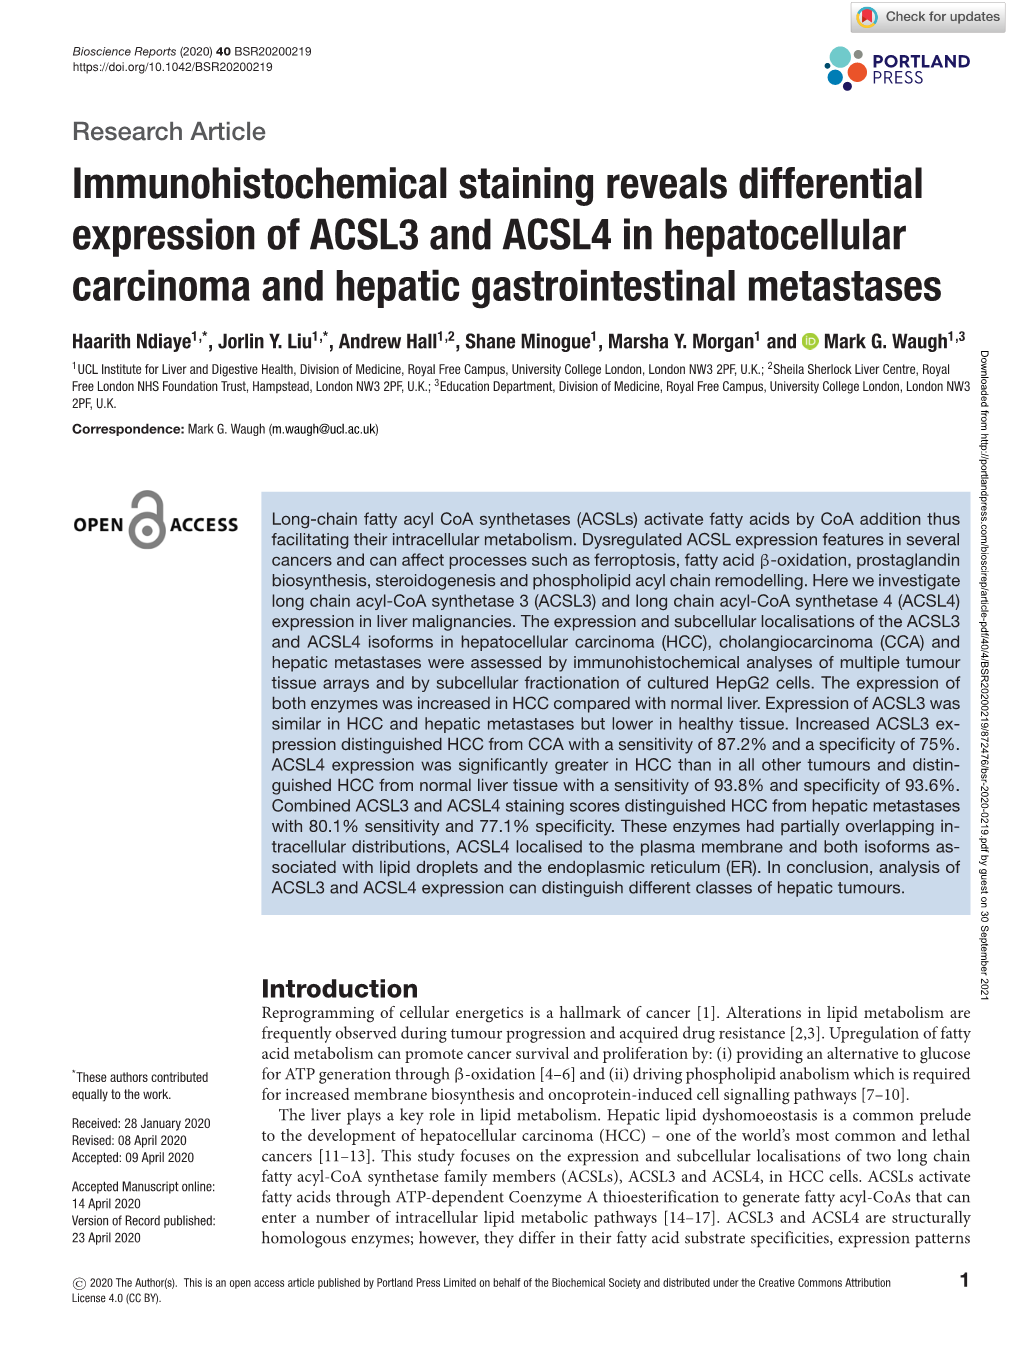 Immunohistochemical Staining Reveals Differential Expression of ACSL3 and ACSL4 in Hepatocellular Carcinoma and Hepatic Gastrointestinal Metastases